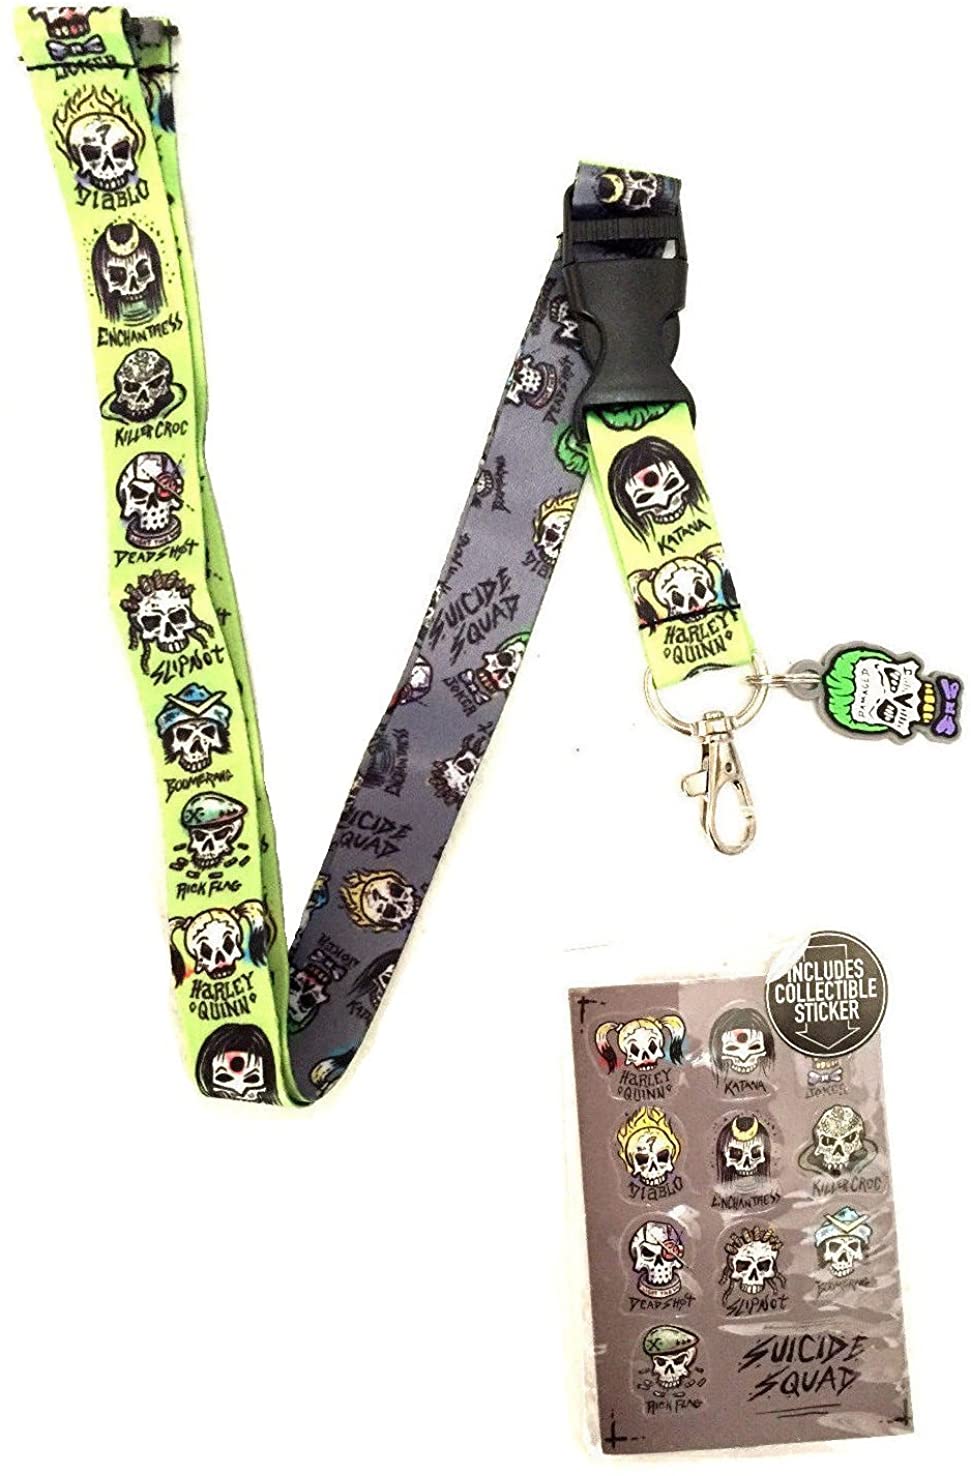 DC Comics Suicide Squad Team Skulls Reversible Breakaway Keychain Lanyard with ID Holder, Joker Rubber Charm and Collectible Sticker